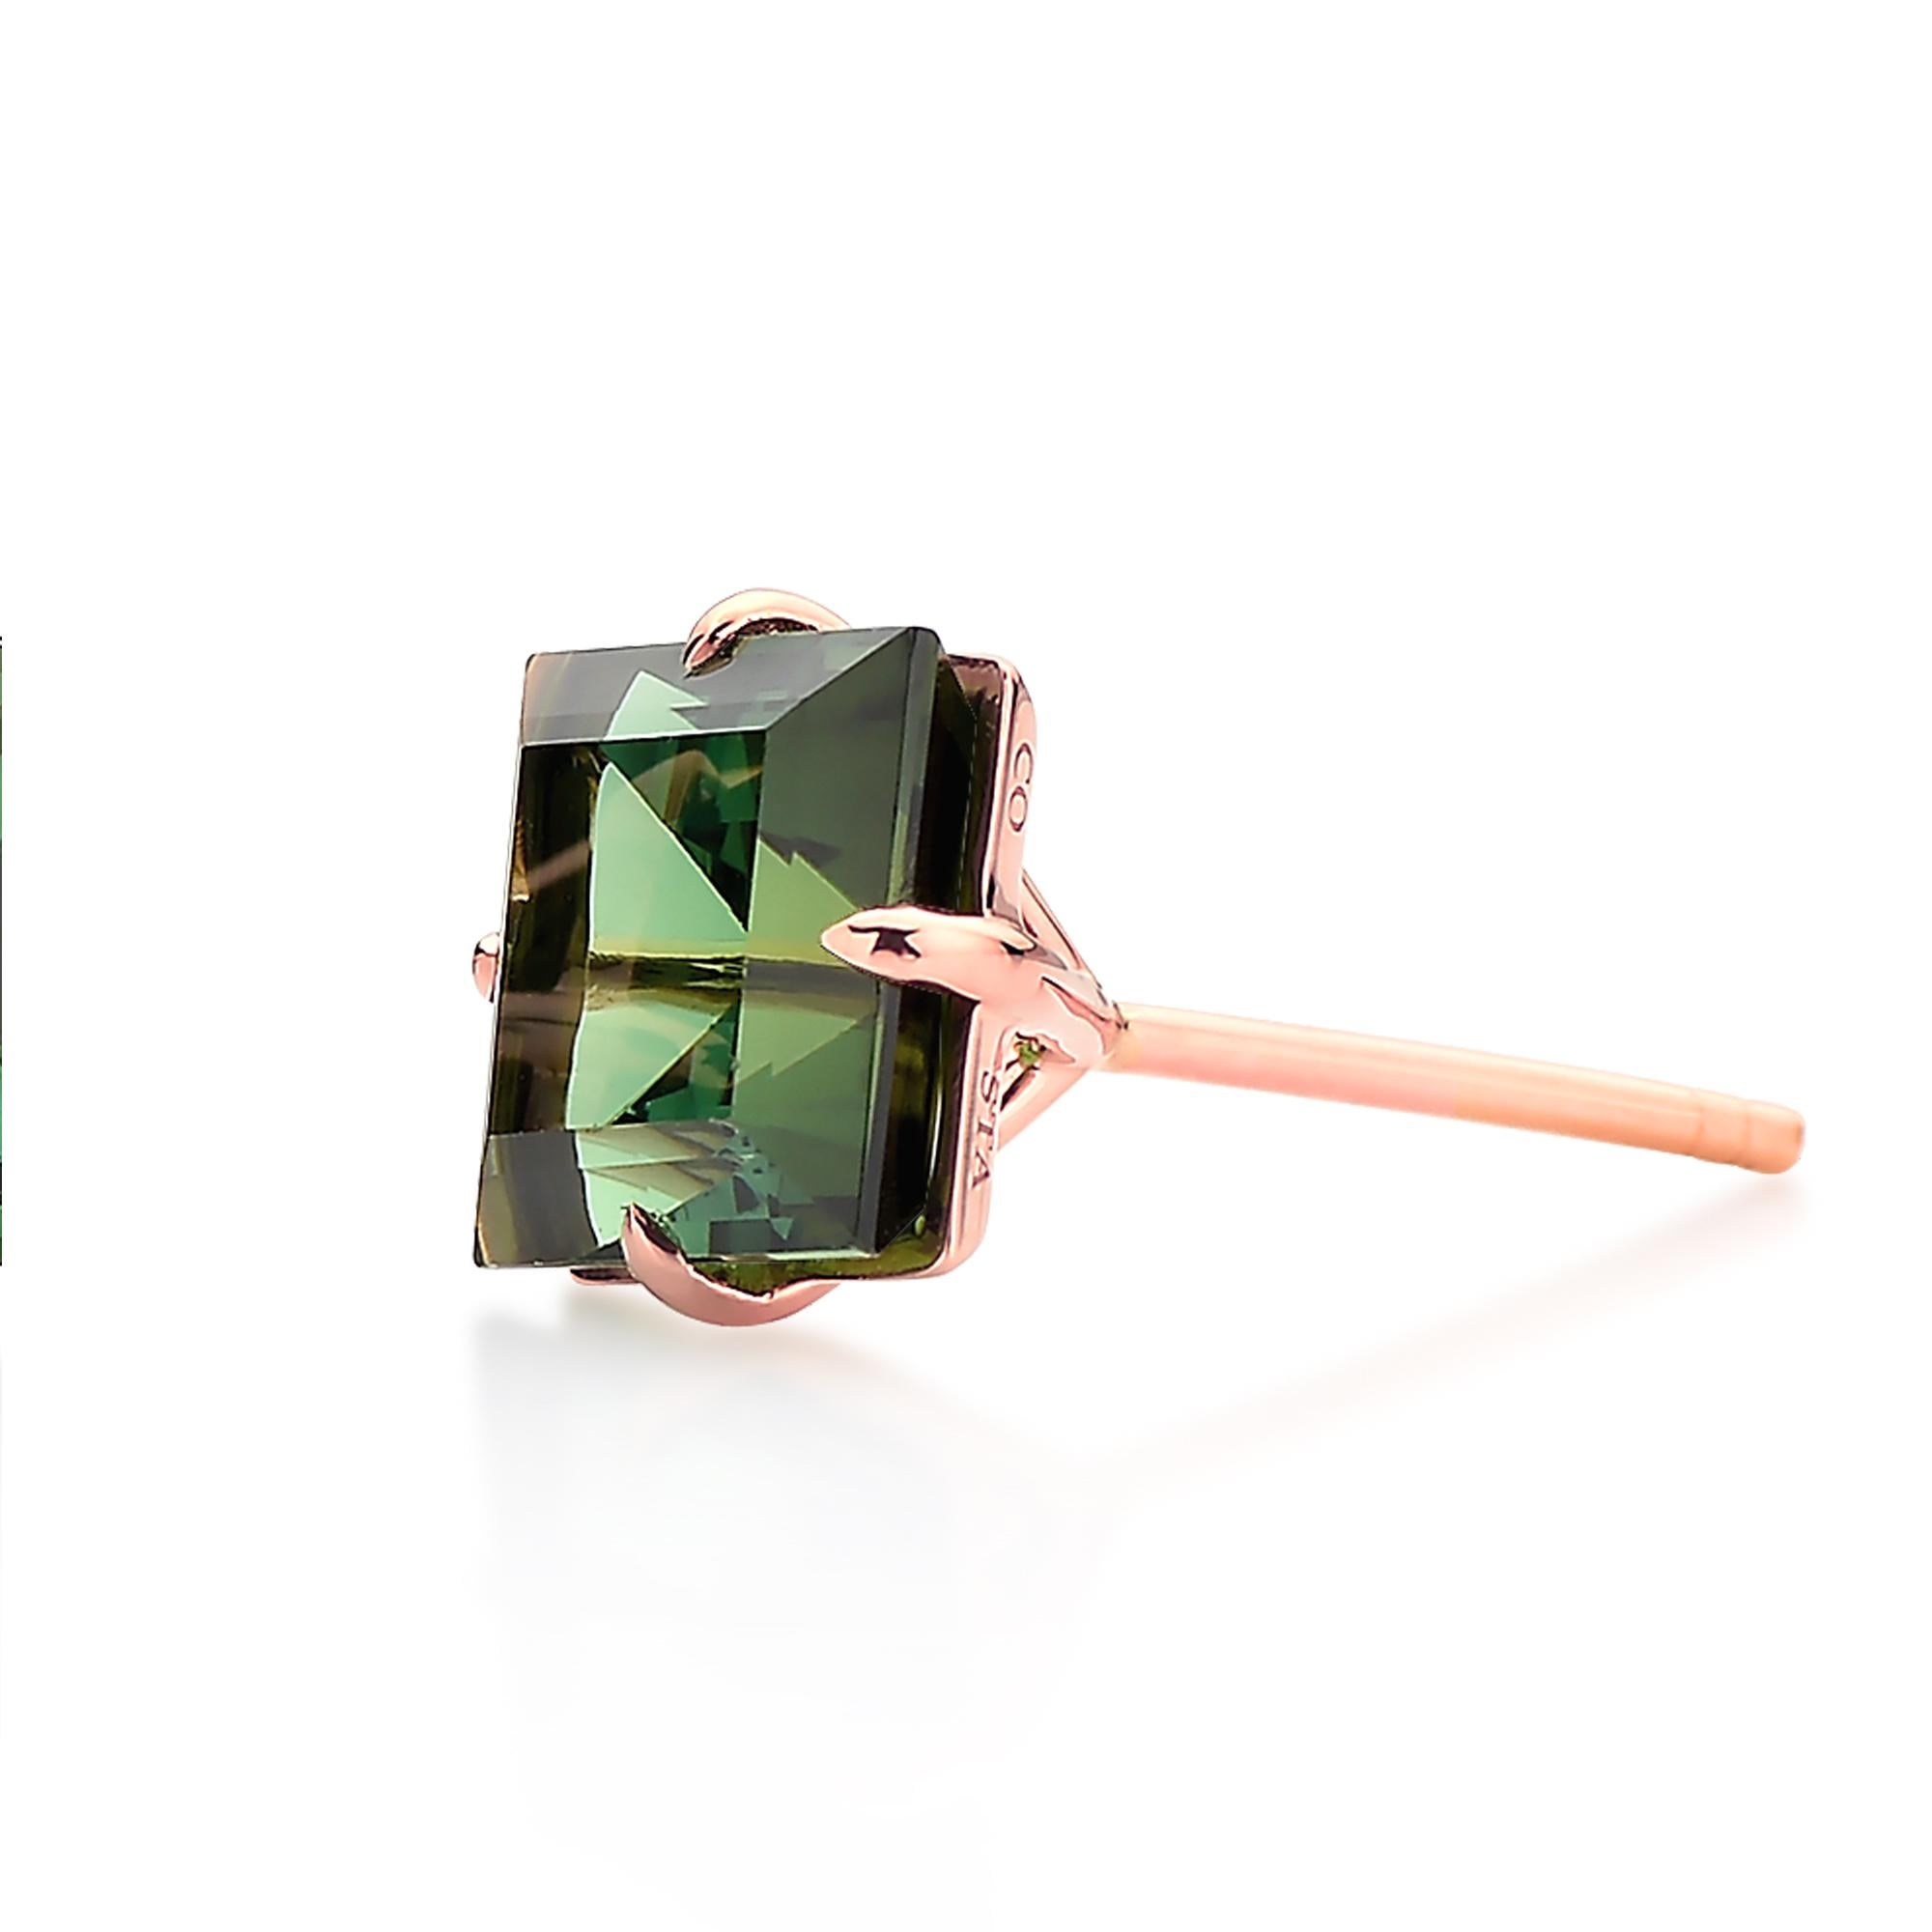 One of a kind emerald cut 6.84 carat green tourmaline studs set in 18kt rose gold.

Sparkling, bright and lightweight, this pair of 18kt rose gold studs are meant for everyday use as an unexpected alternative to a classic pair of diamond studs.

The